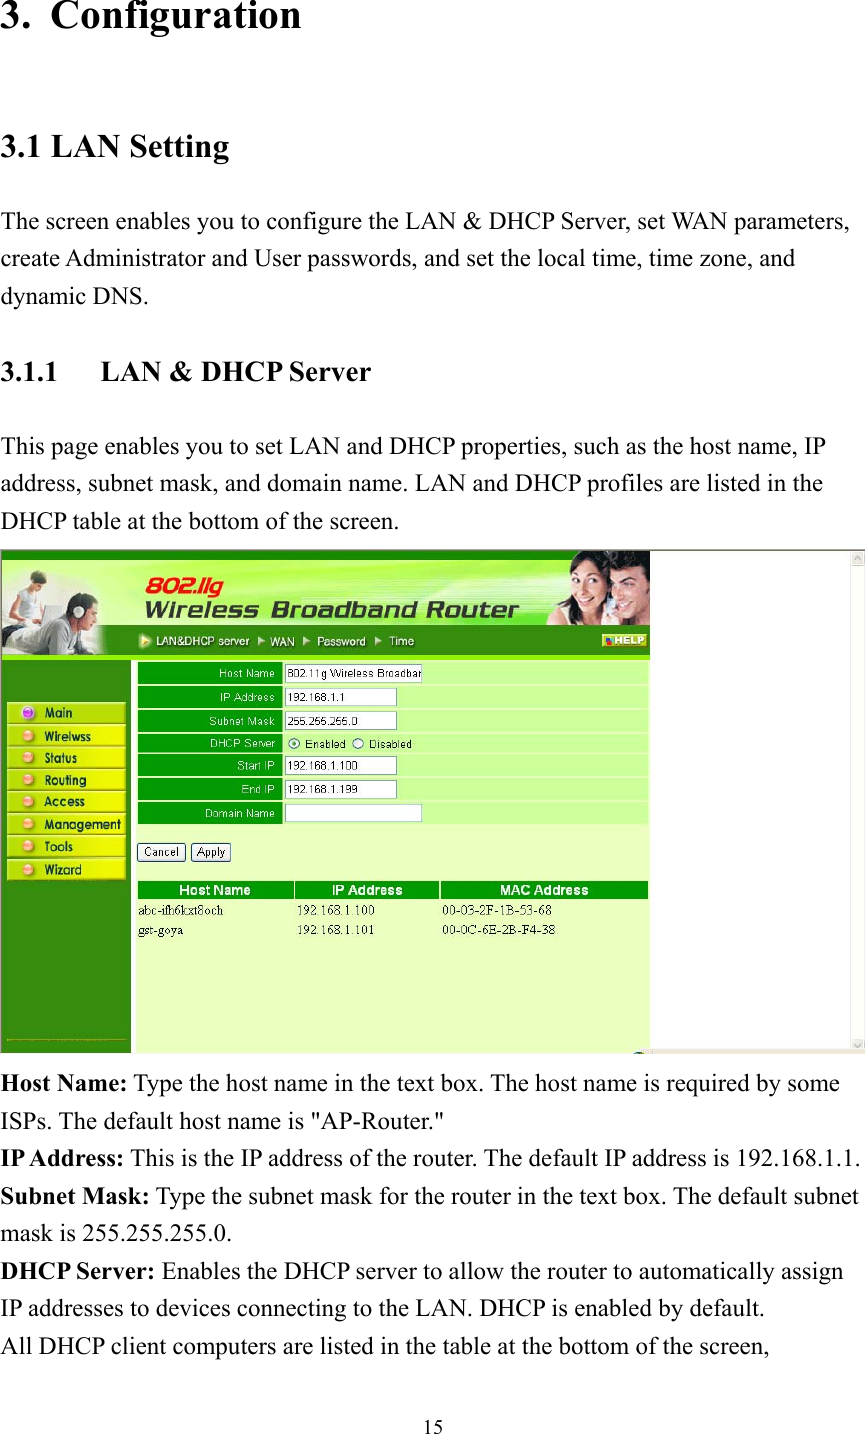  153. Configuration 3.1 LAN Setting The screen enables you to configure the LAN &amp; DHCP Server, set WAN parameters, create Administrator and User passwords, and set the local time, time zone, and dynamic DNS. 3.1.1  LAN &amp; DHCP Server This page enables you to set LAN and DHCP properties, such as the host name, IP address, subnet mask, and domain name. LAN and DHCP profiles are listed in the DHCP table at the bottom of the screen.  Host Name: Type the host name in the text box. The host name is required by some ISPs. The default host name is &quot;AP-Router.&quot; IP Address: This is the IP address of the router. The default IP address is 192.168.1.1. Subnet Mask: Type the subnet mask for the router in the text box. The default subnet mask is 255.255.255.0. DHCP Server: Enables the DHCP server to allow the router to automatically assign IP addresses to devices connecting to the LAN. DHCP is enabled by default. All DHCP client computers are listed in the table at the bottom of the screen, 